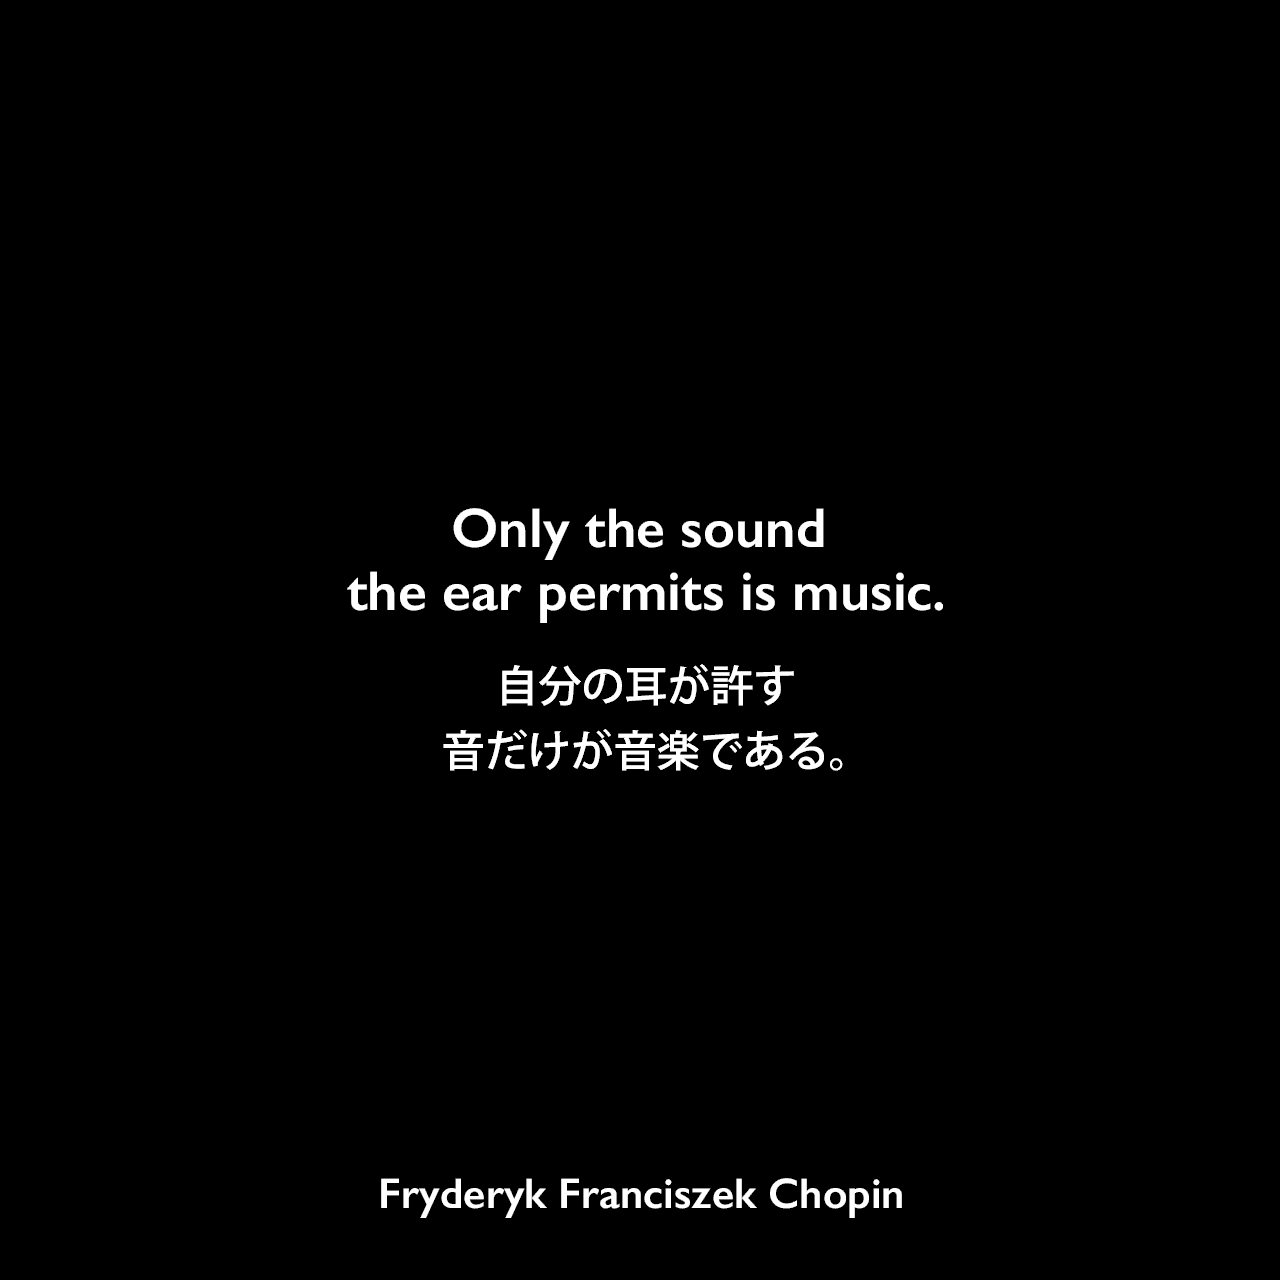 Only the sound the ear permits is music.自分の耳が許す音だけが音楽である。Fryderyk Franciszek Chopin